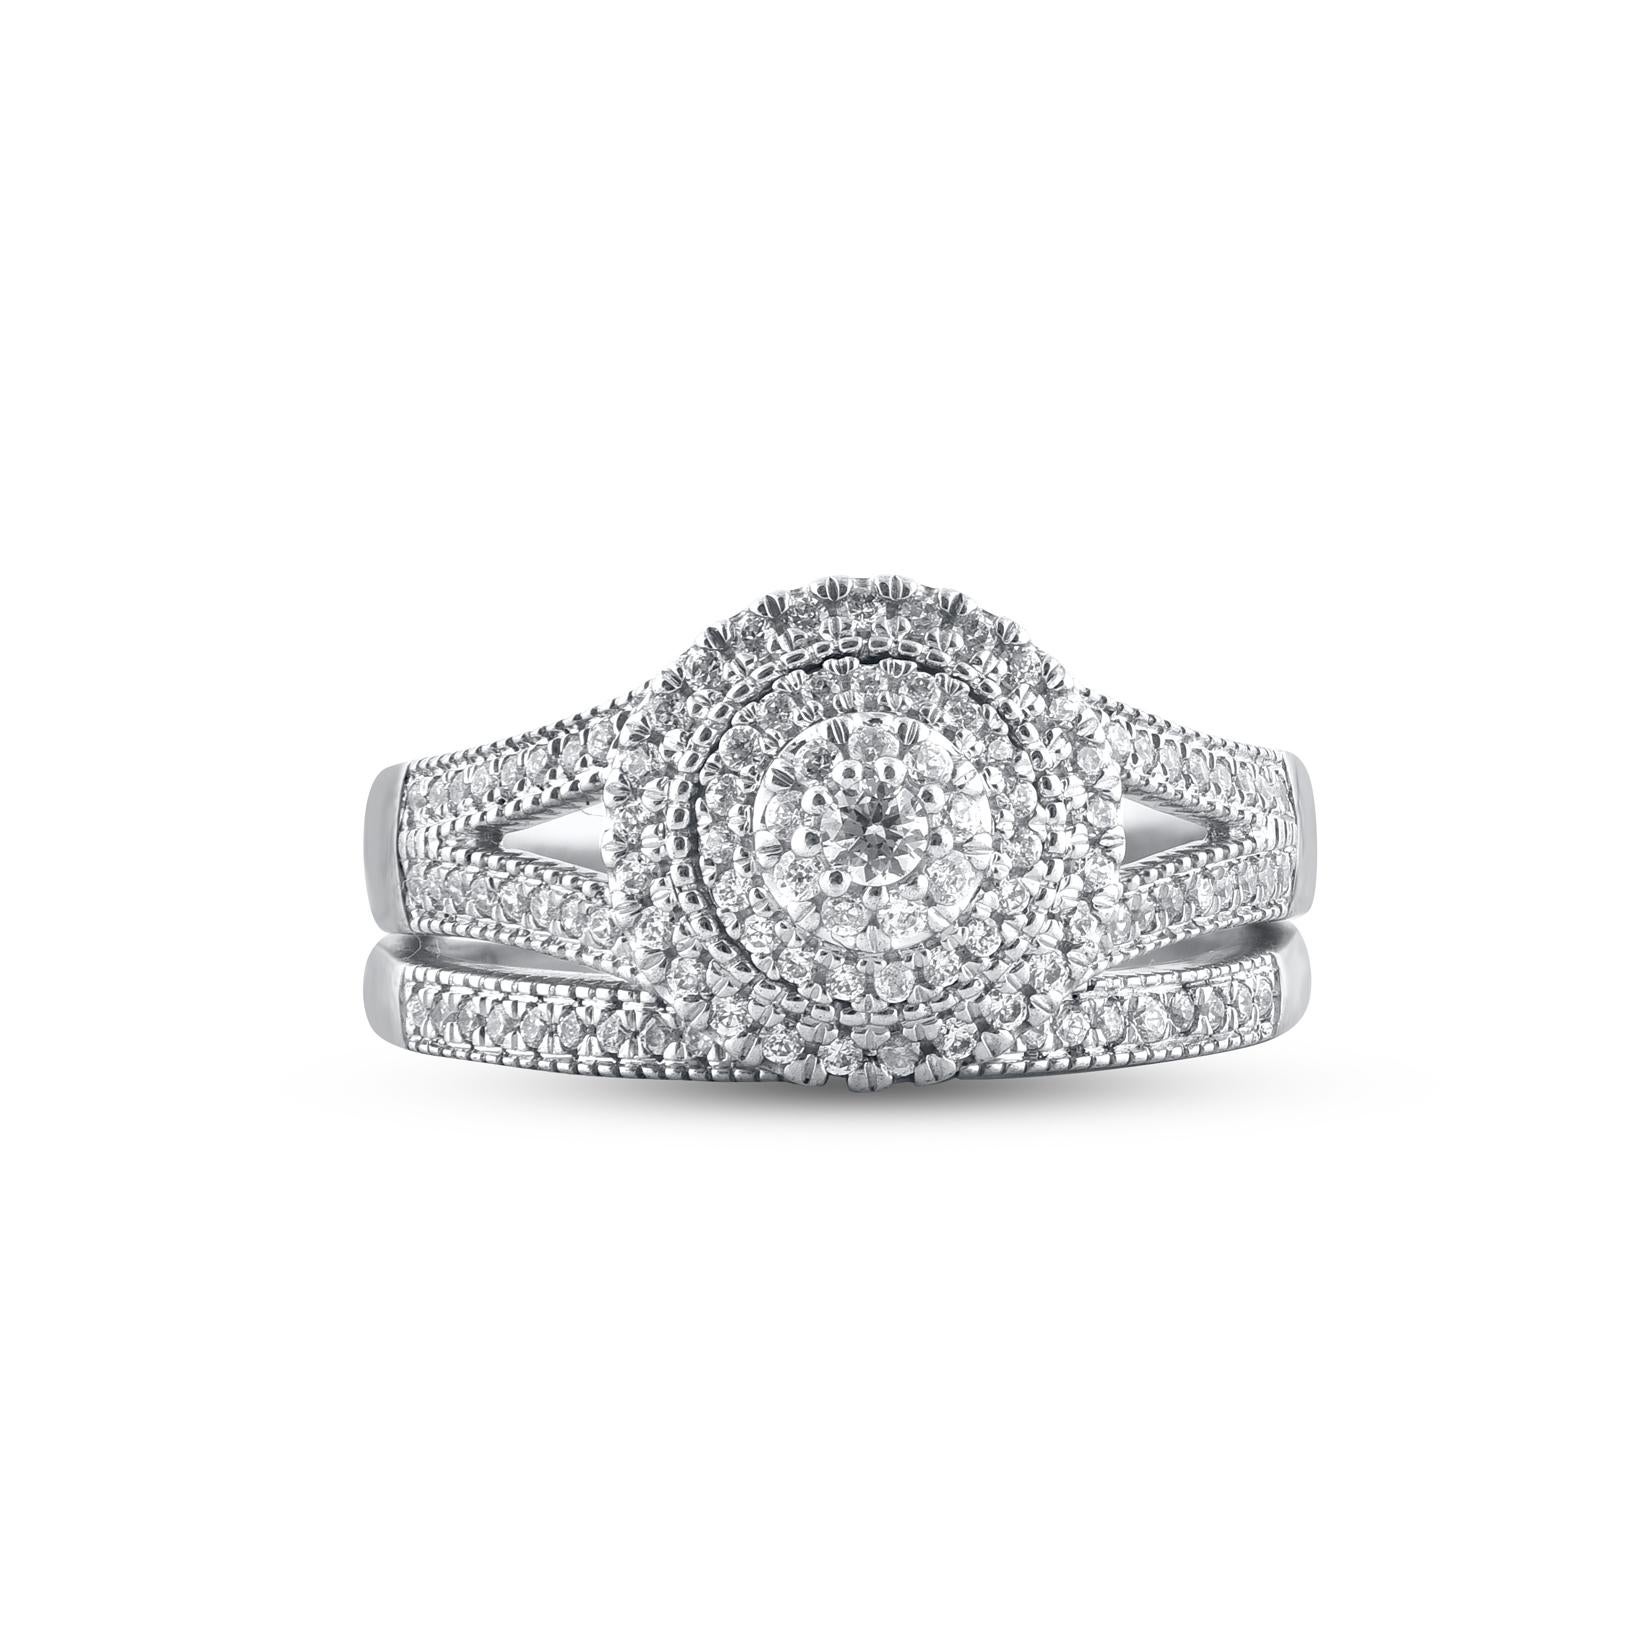 Contemporary TJD 0.50 Carat Natural Diamond 14KT White Gold Vintage Style Bridal Ring Set For Sale